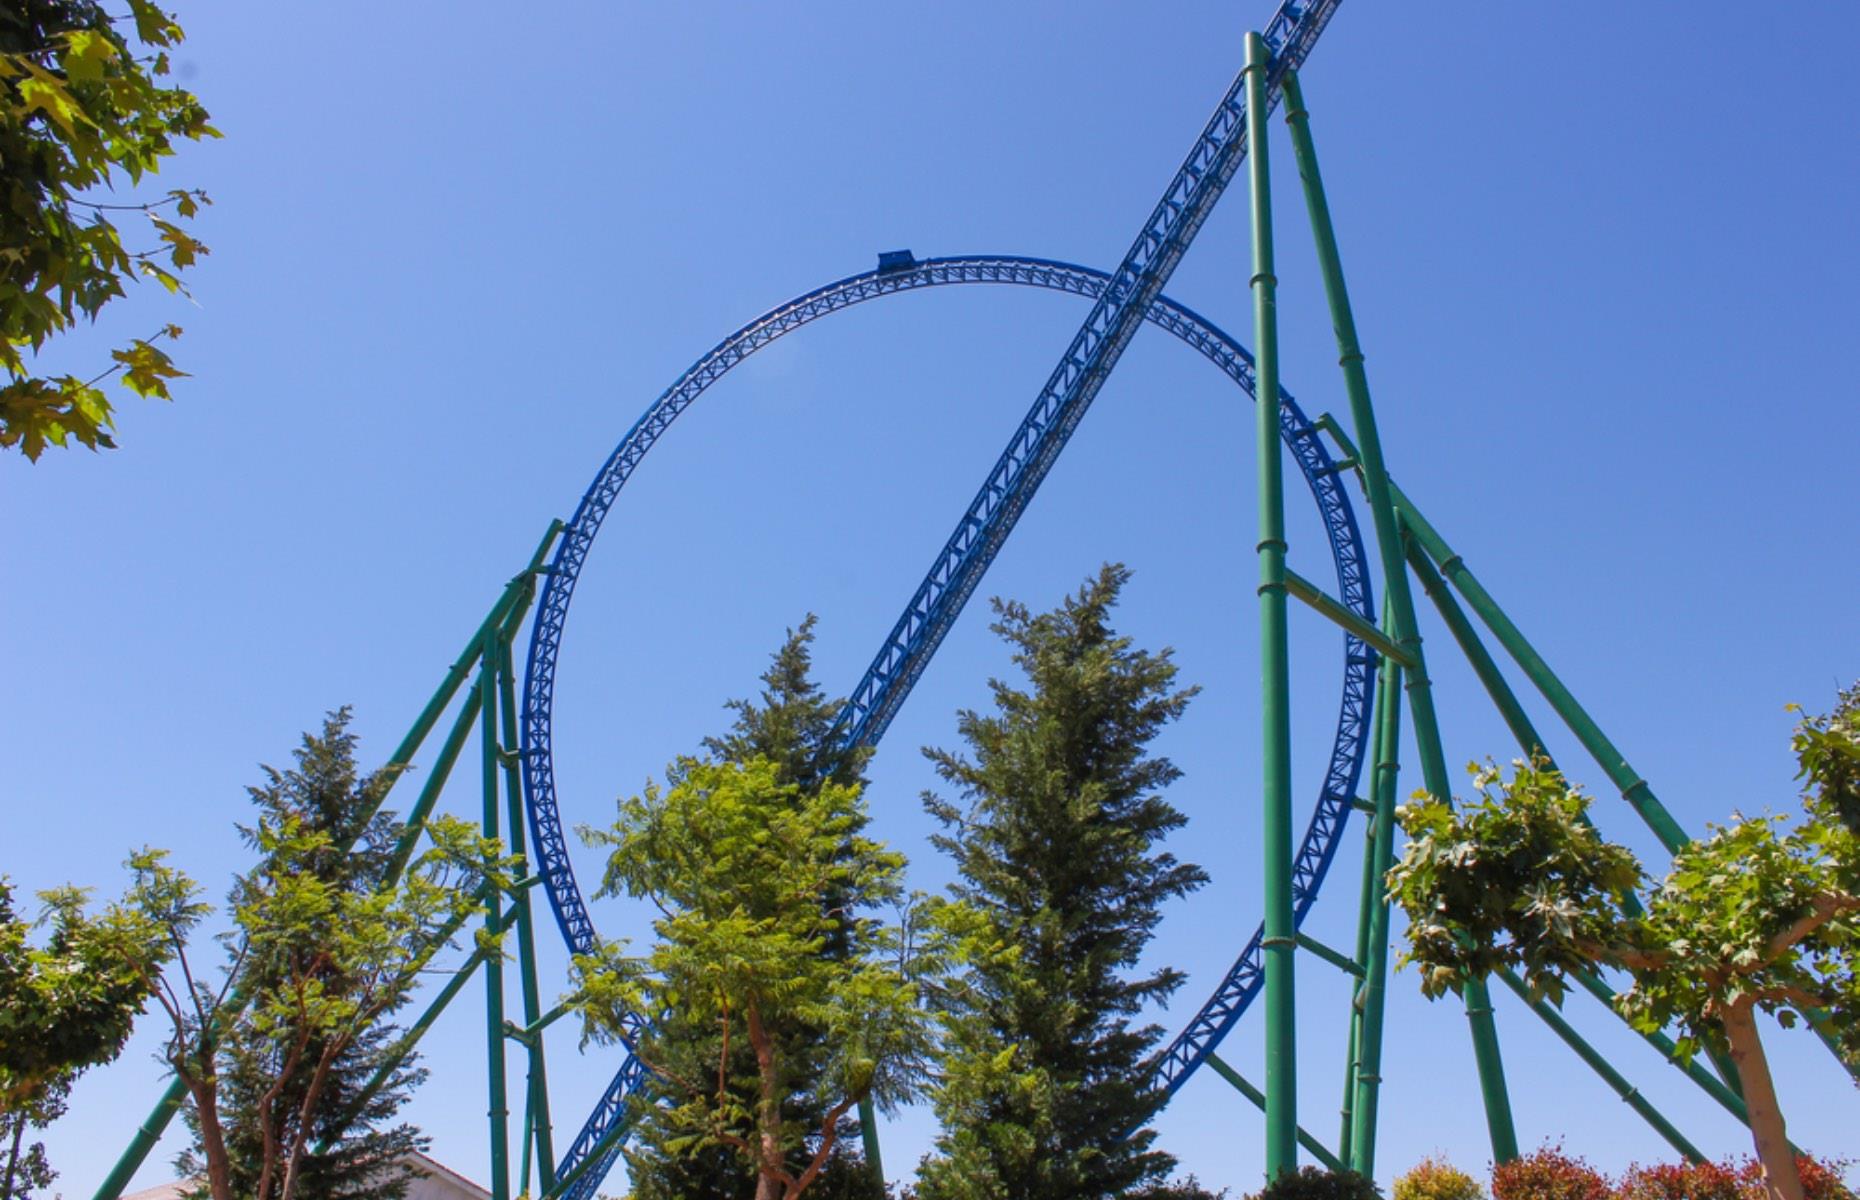 <p>Hyper Coaster also holds the record for the largest loop with Flash in China. Both loops are 139 feet and were built by the same company, Mack Rides. Hyper Coaster carried its first riders in 2018.</p>  <p>It takes riders up a huge lift hill before dropping through a 180° left turn straight into the colossal loop at 72 miles per hour.</p>